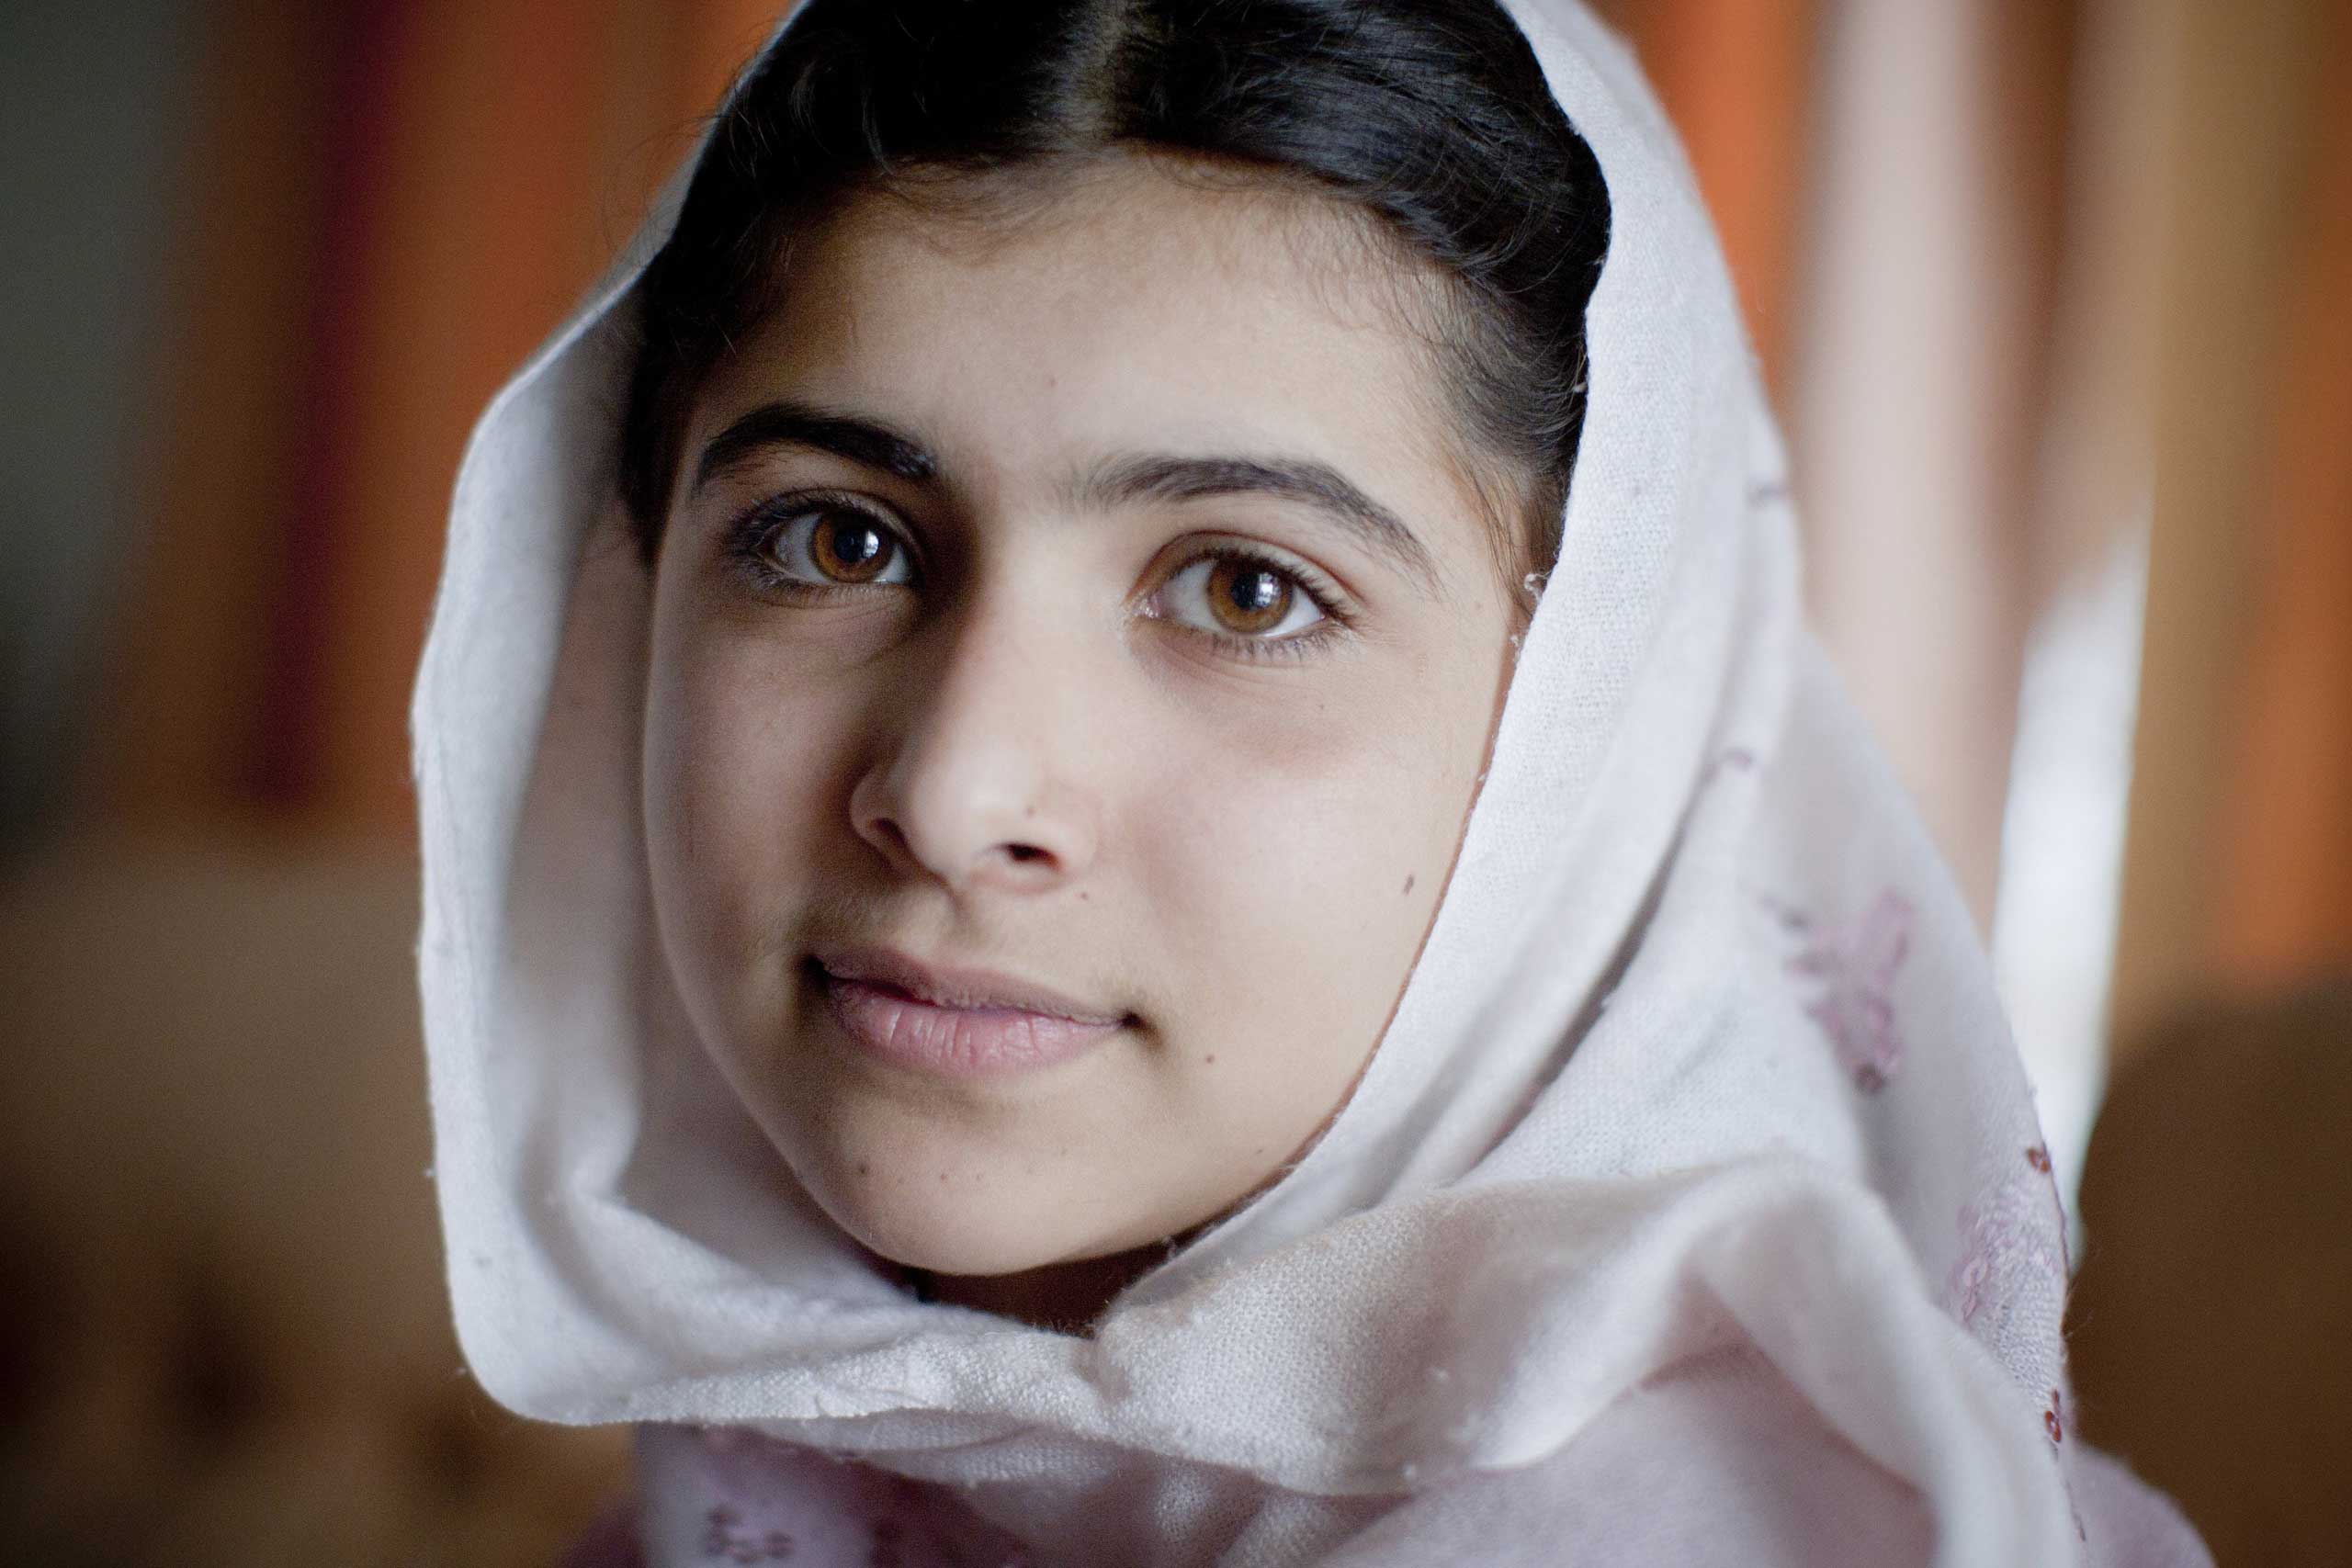 Malala Yousafzai lives in the Swat Valley with her family seen here on March 26, 2009 in Peshawar, Pakistan.